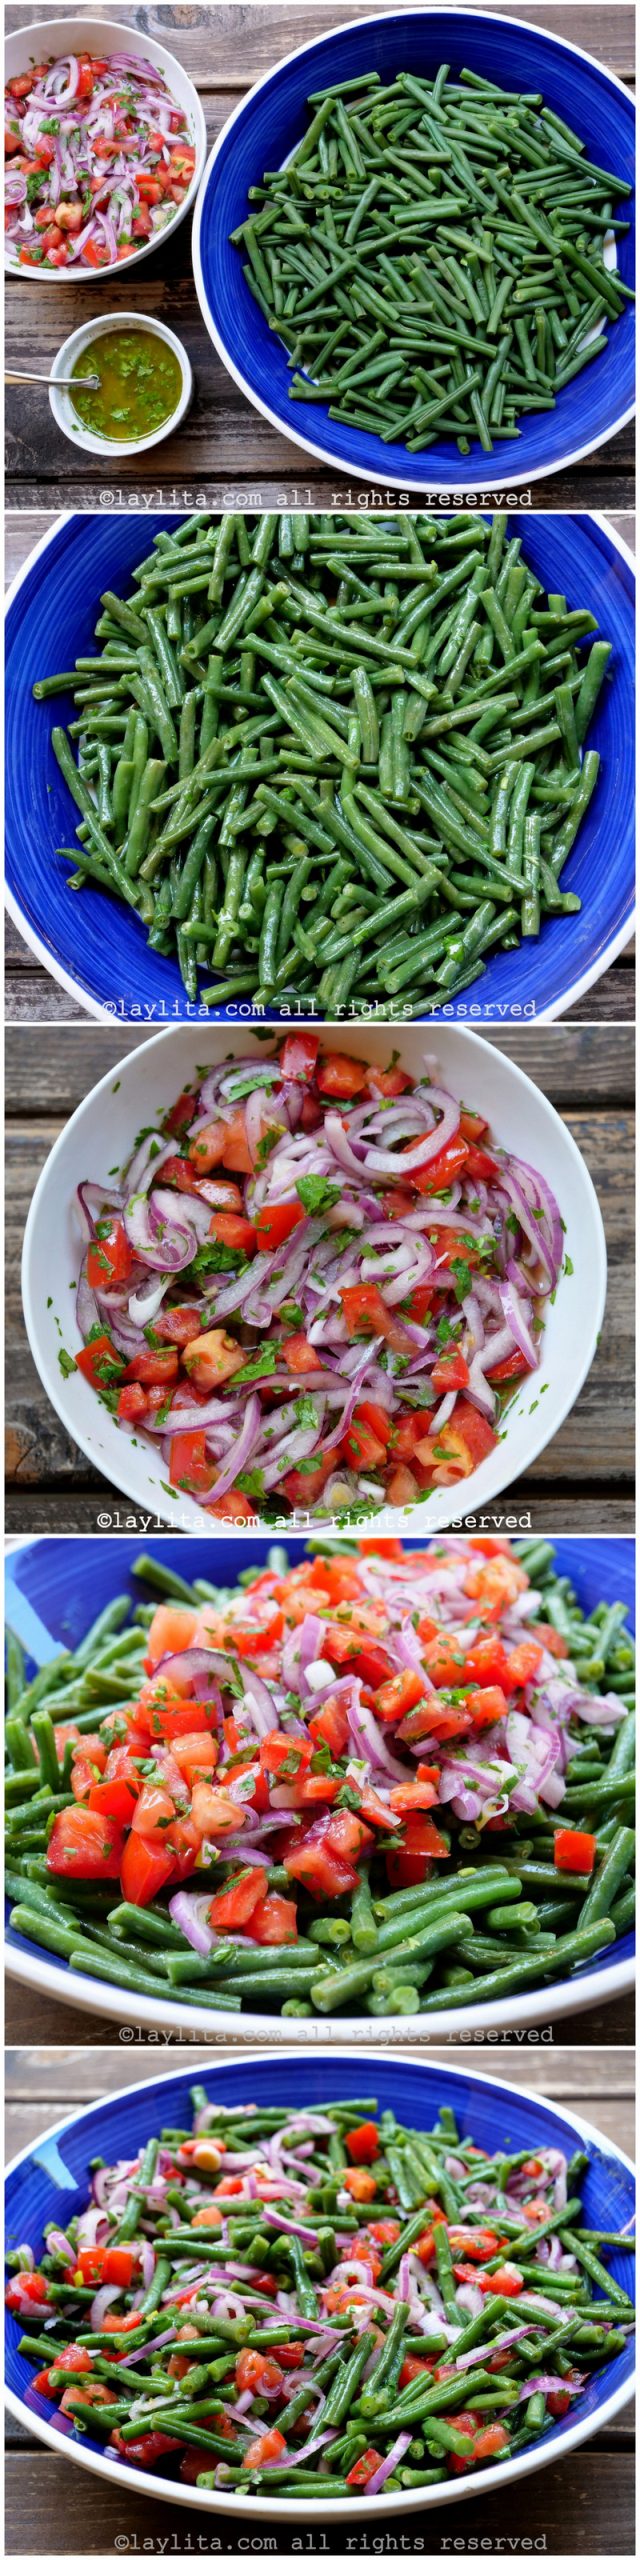 Step by step preparation for green bean tomato salad with cilantro lime mustard dressing